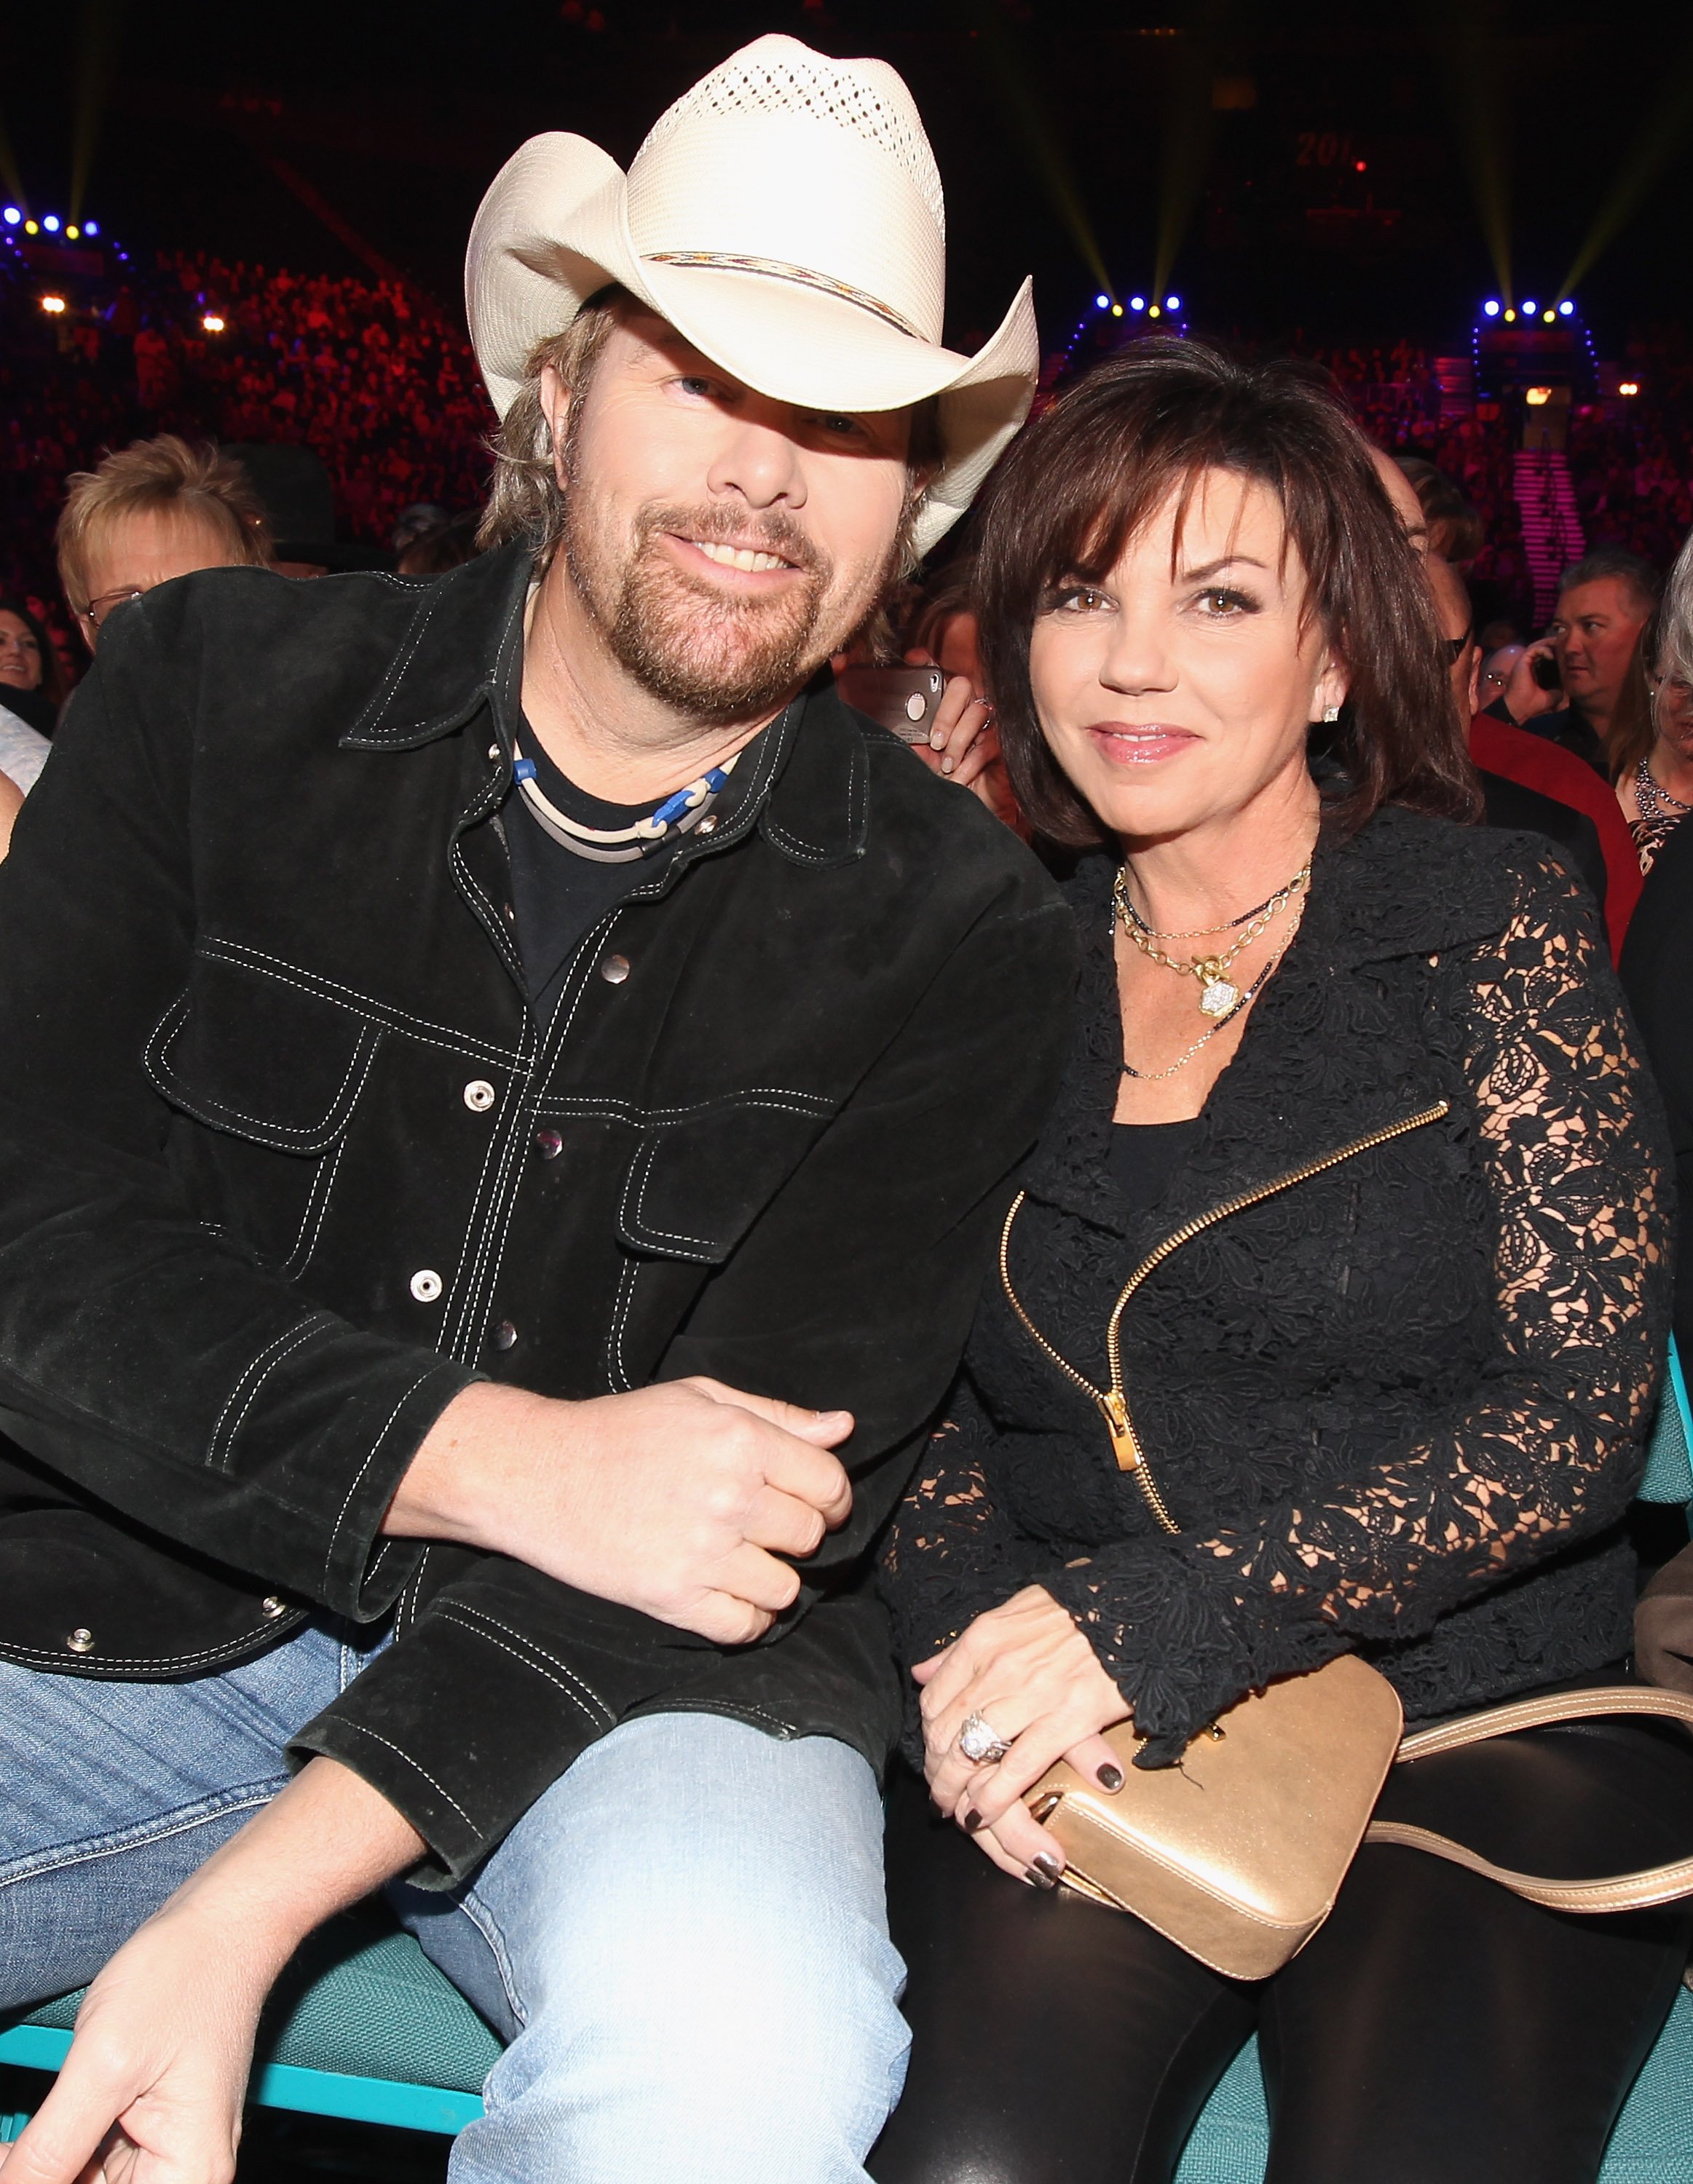 Musician Toby Keith and Tricia Lucus attend the American Country Awards 2011 at the MGM Grand Garden Arena on December 5, 2011 in Las Vegas, Nevada ┃ Source: Getty Images